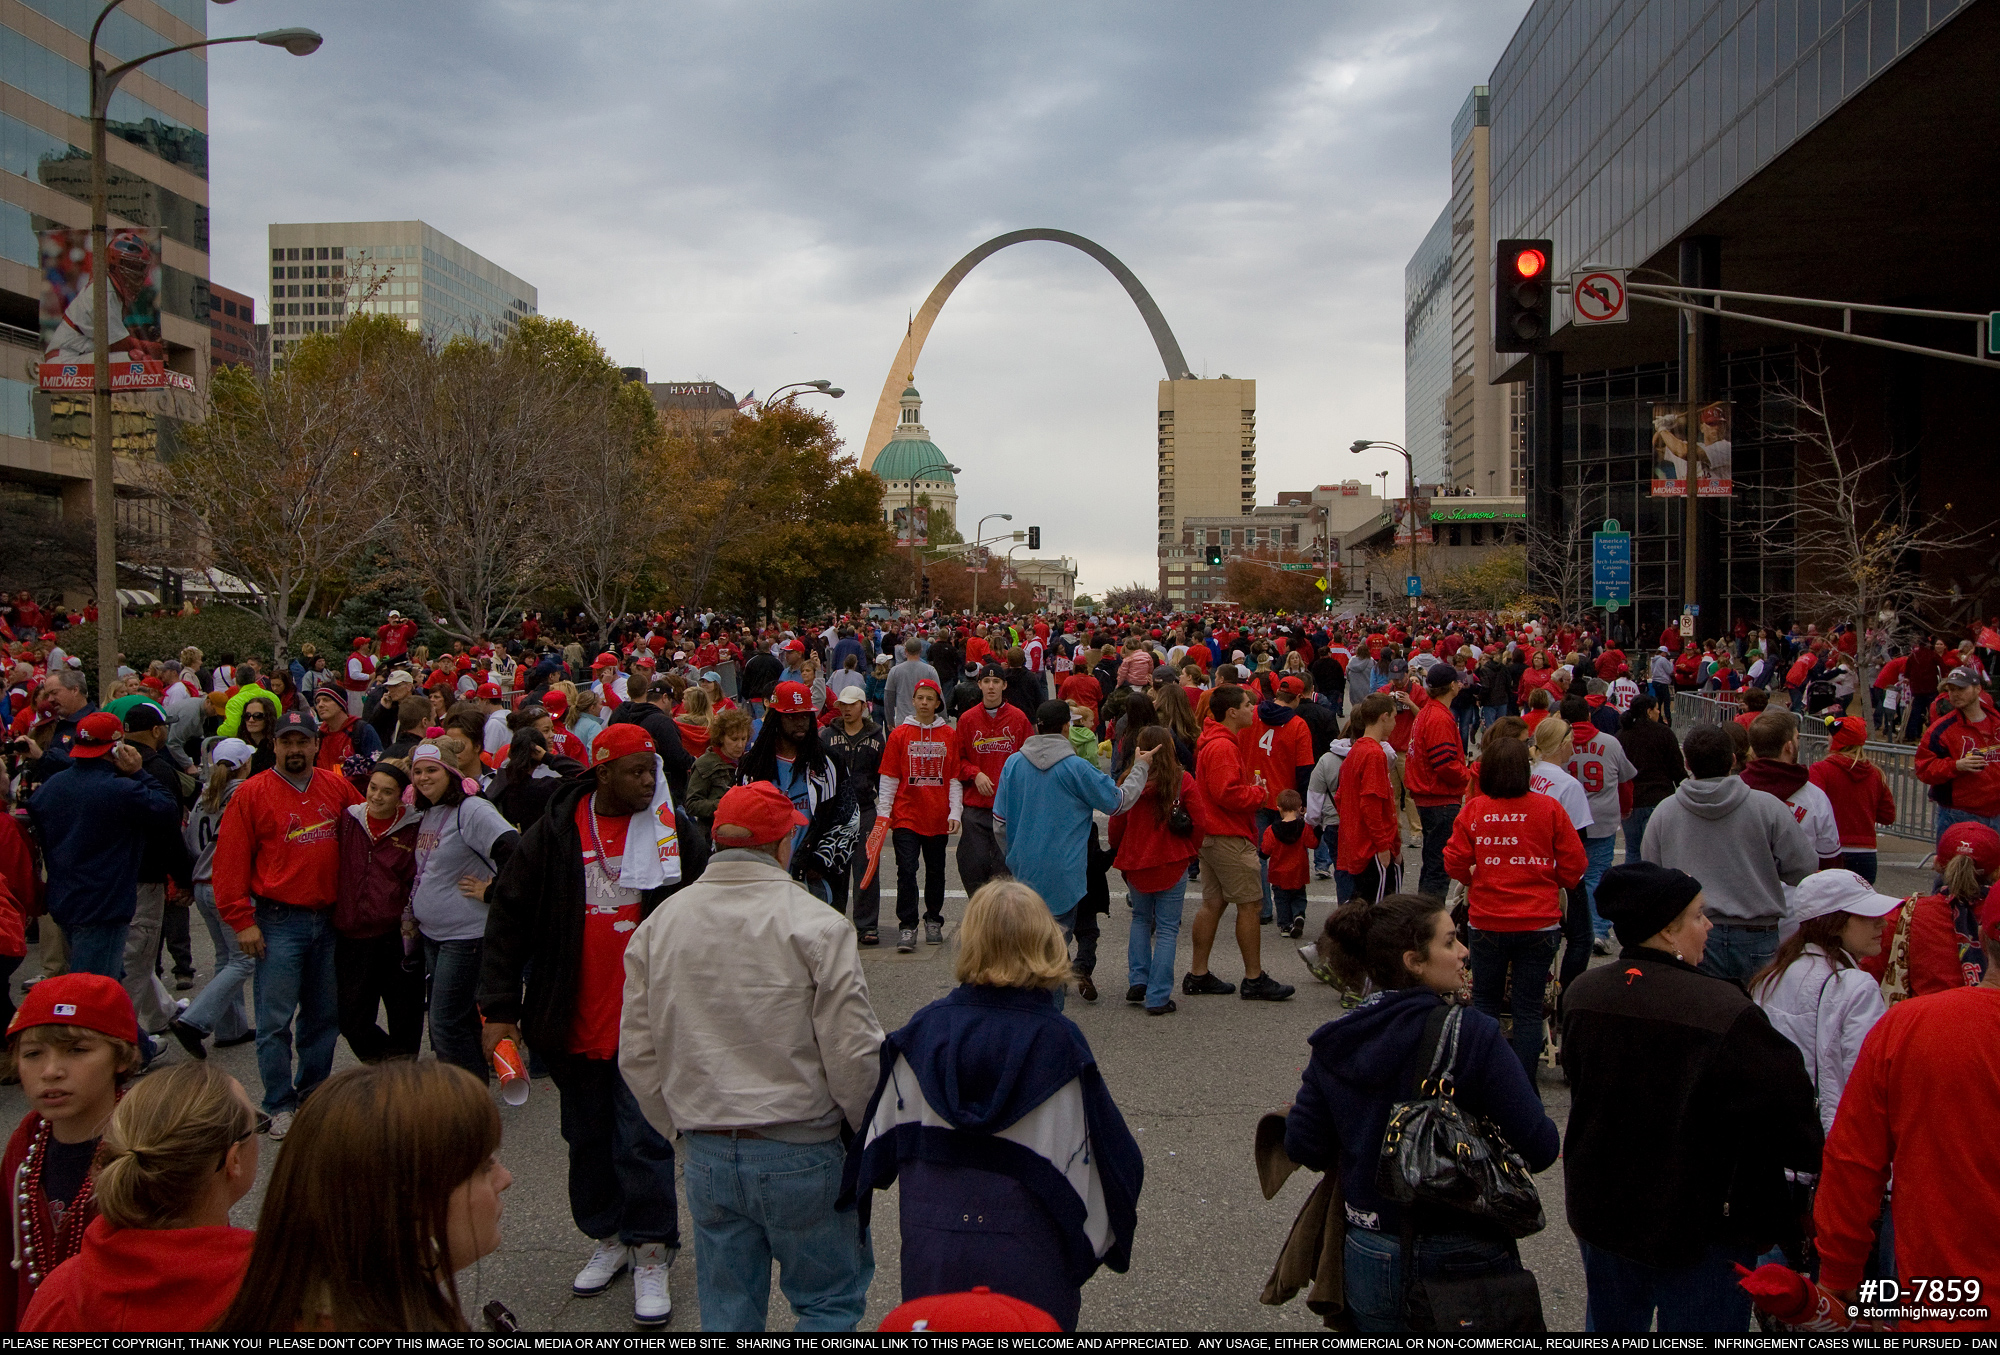 The Gateway Arch over Cardinals fans